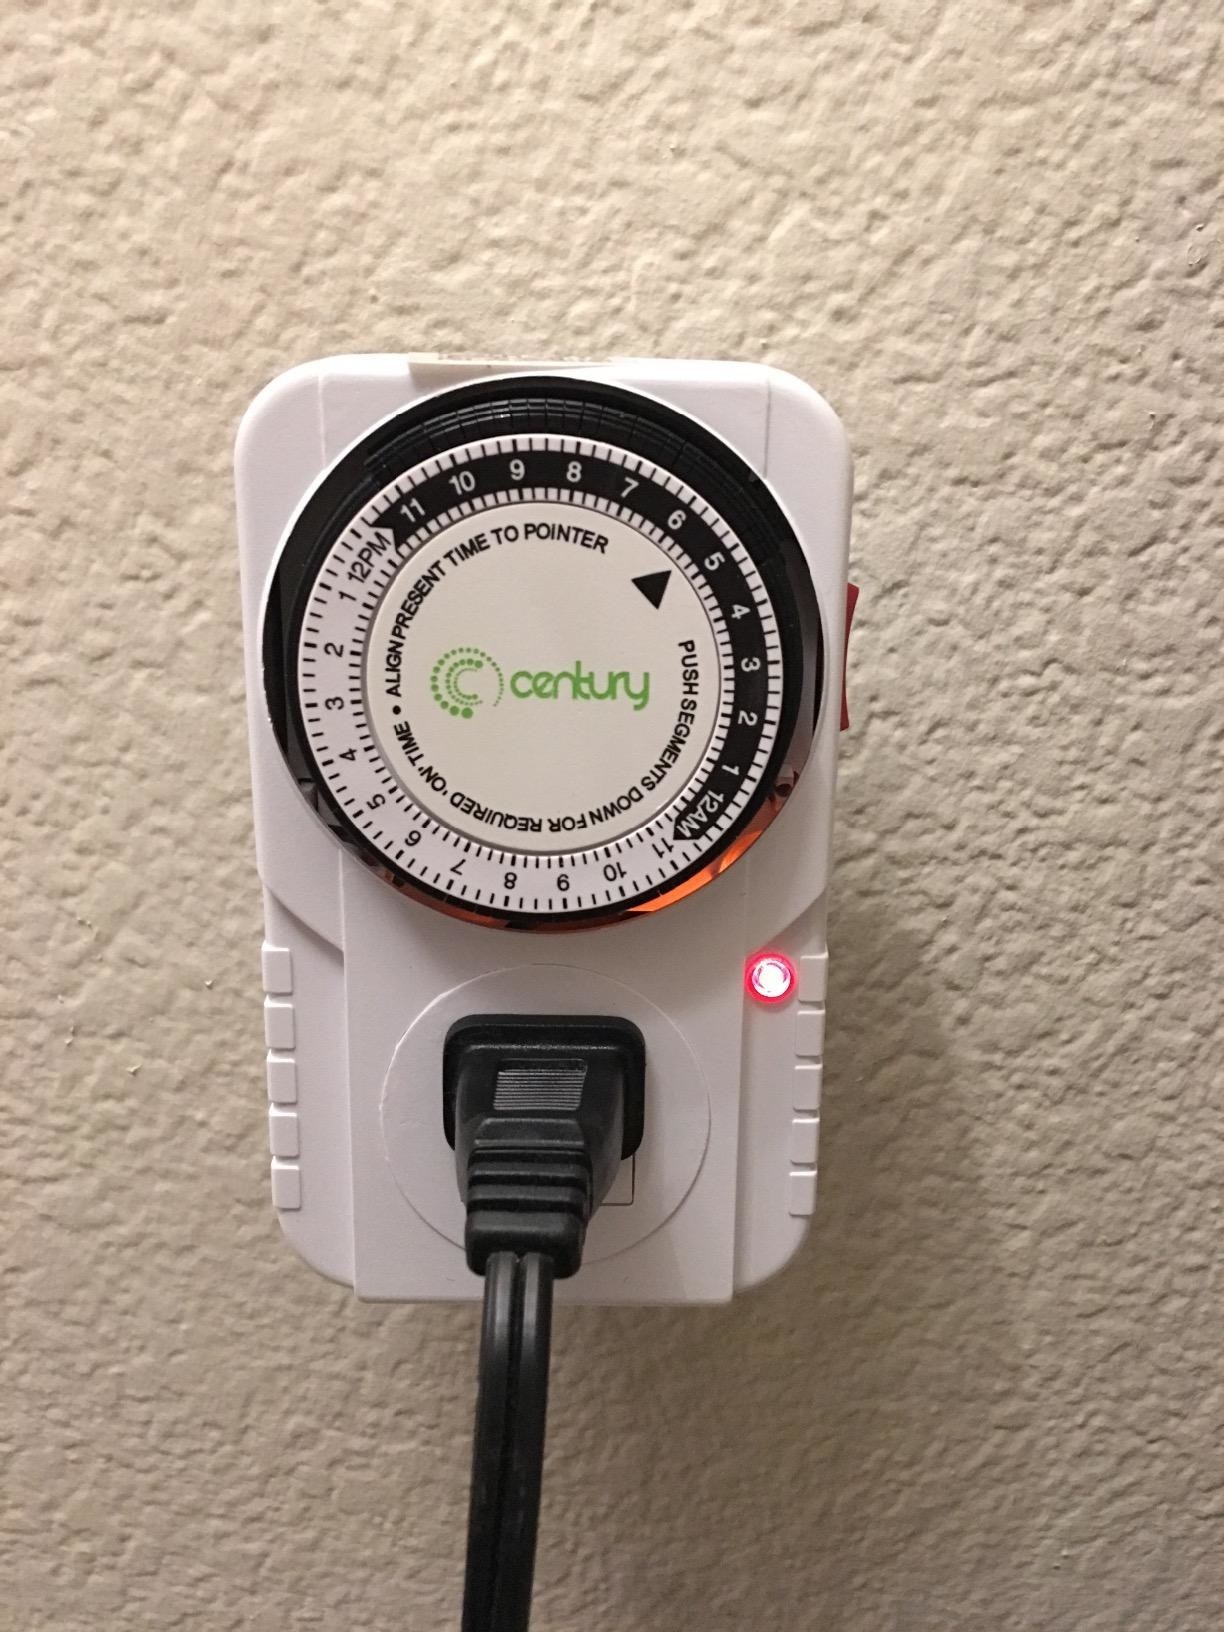 Reviewer timer outlet plugged into wall